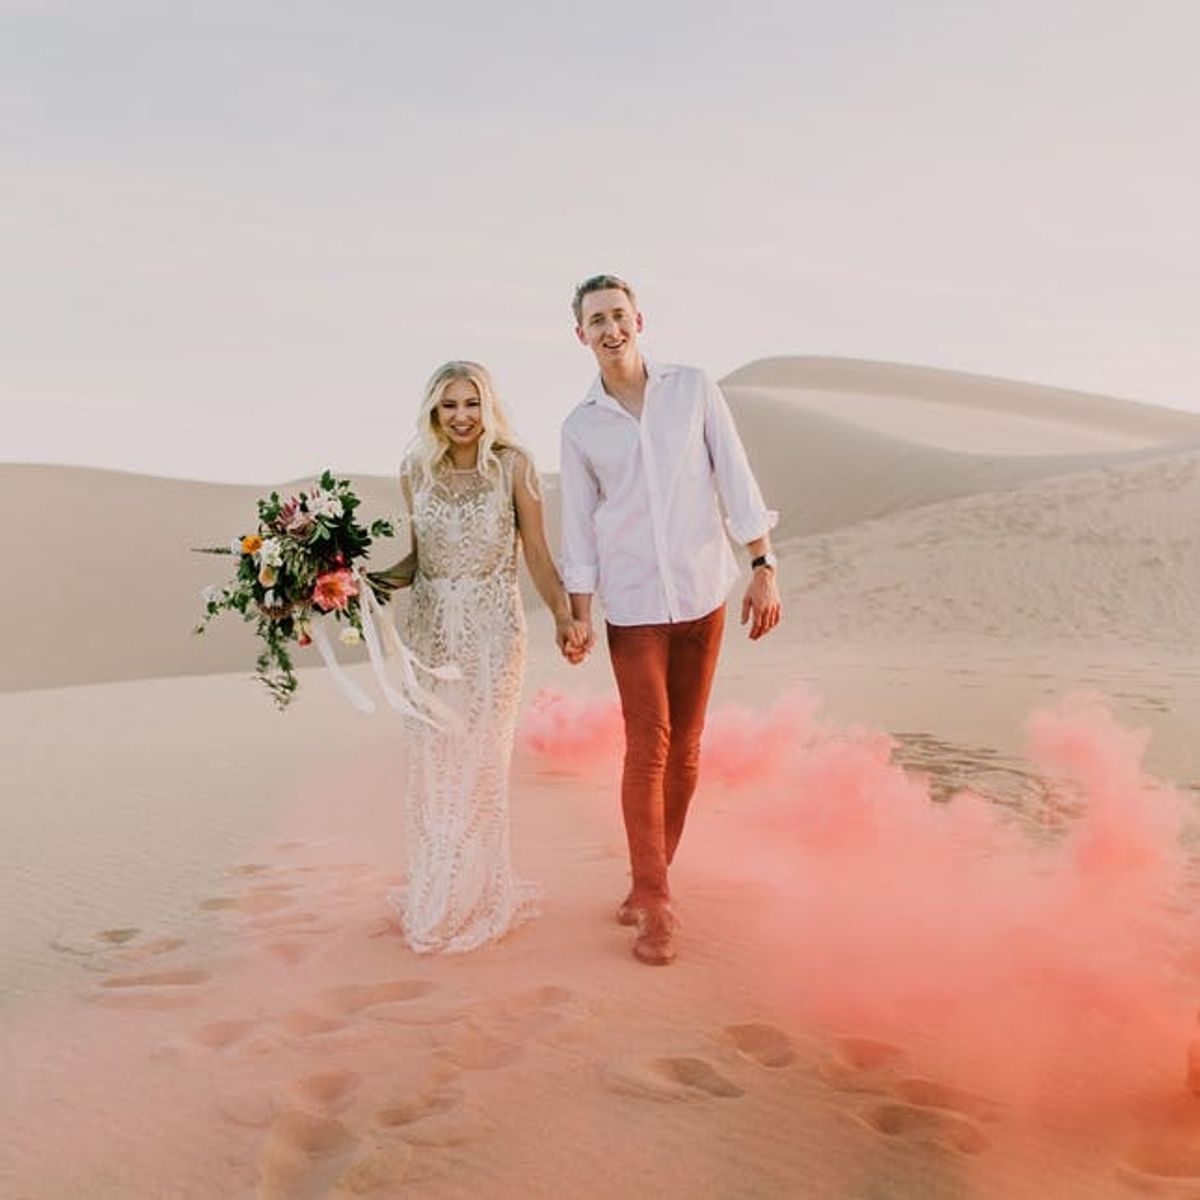 9 Sand Dune Wedding Photos We Can’t Stop Staring At